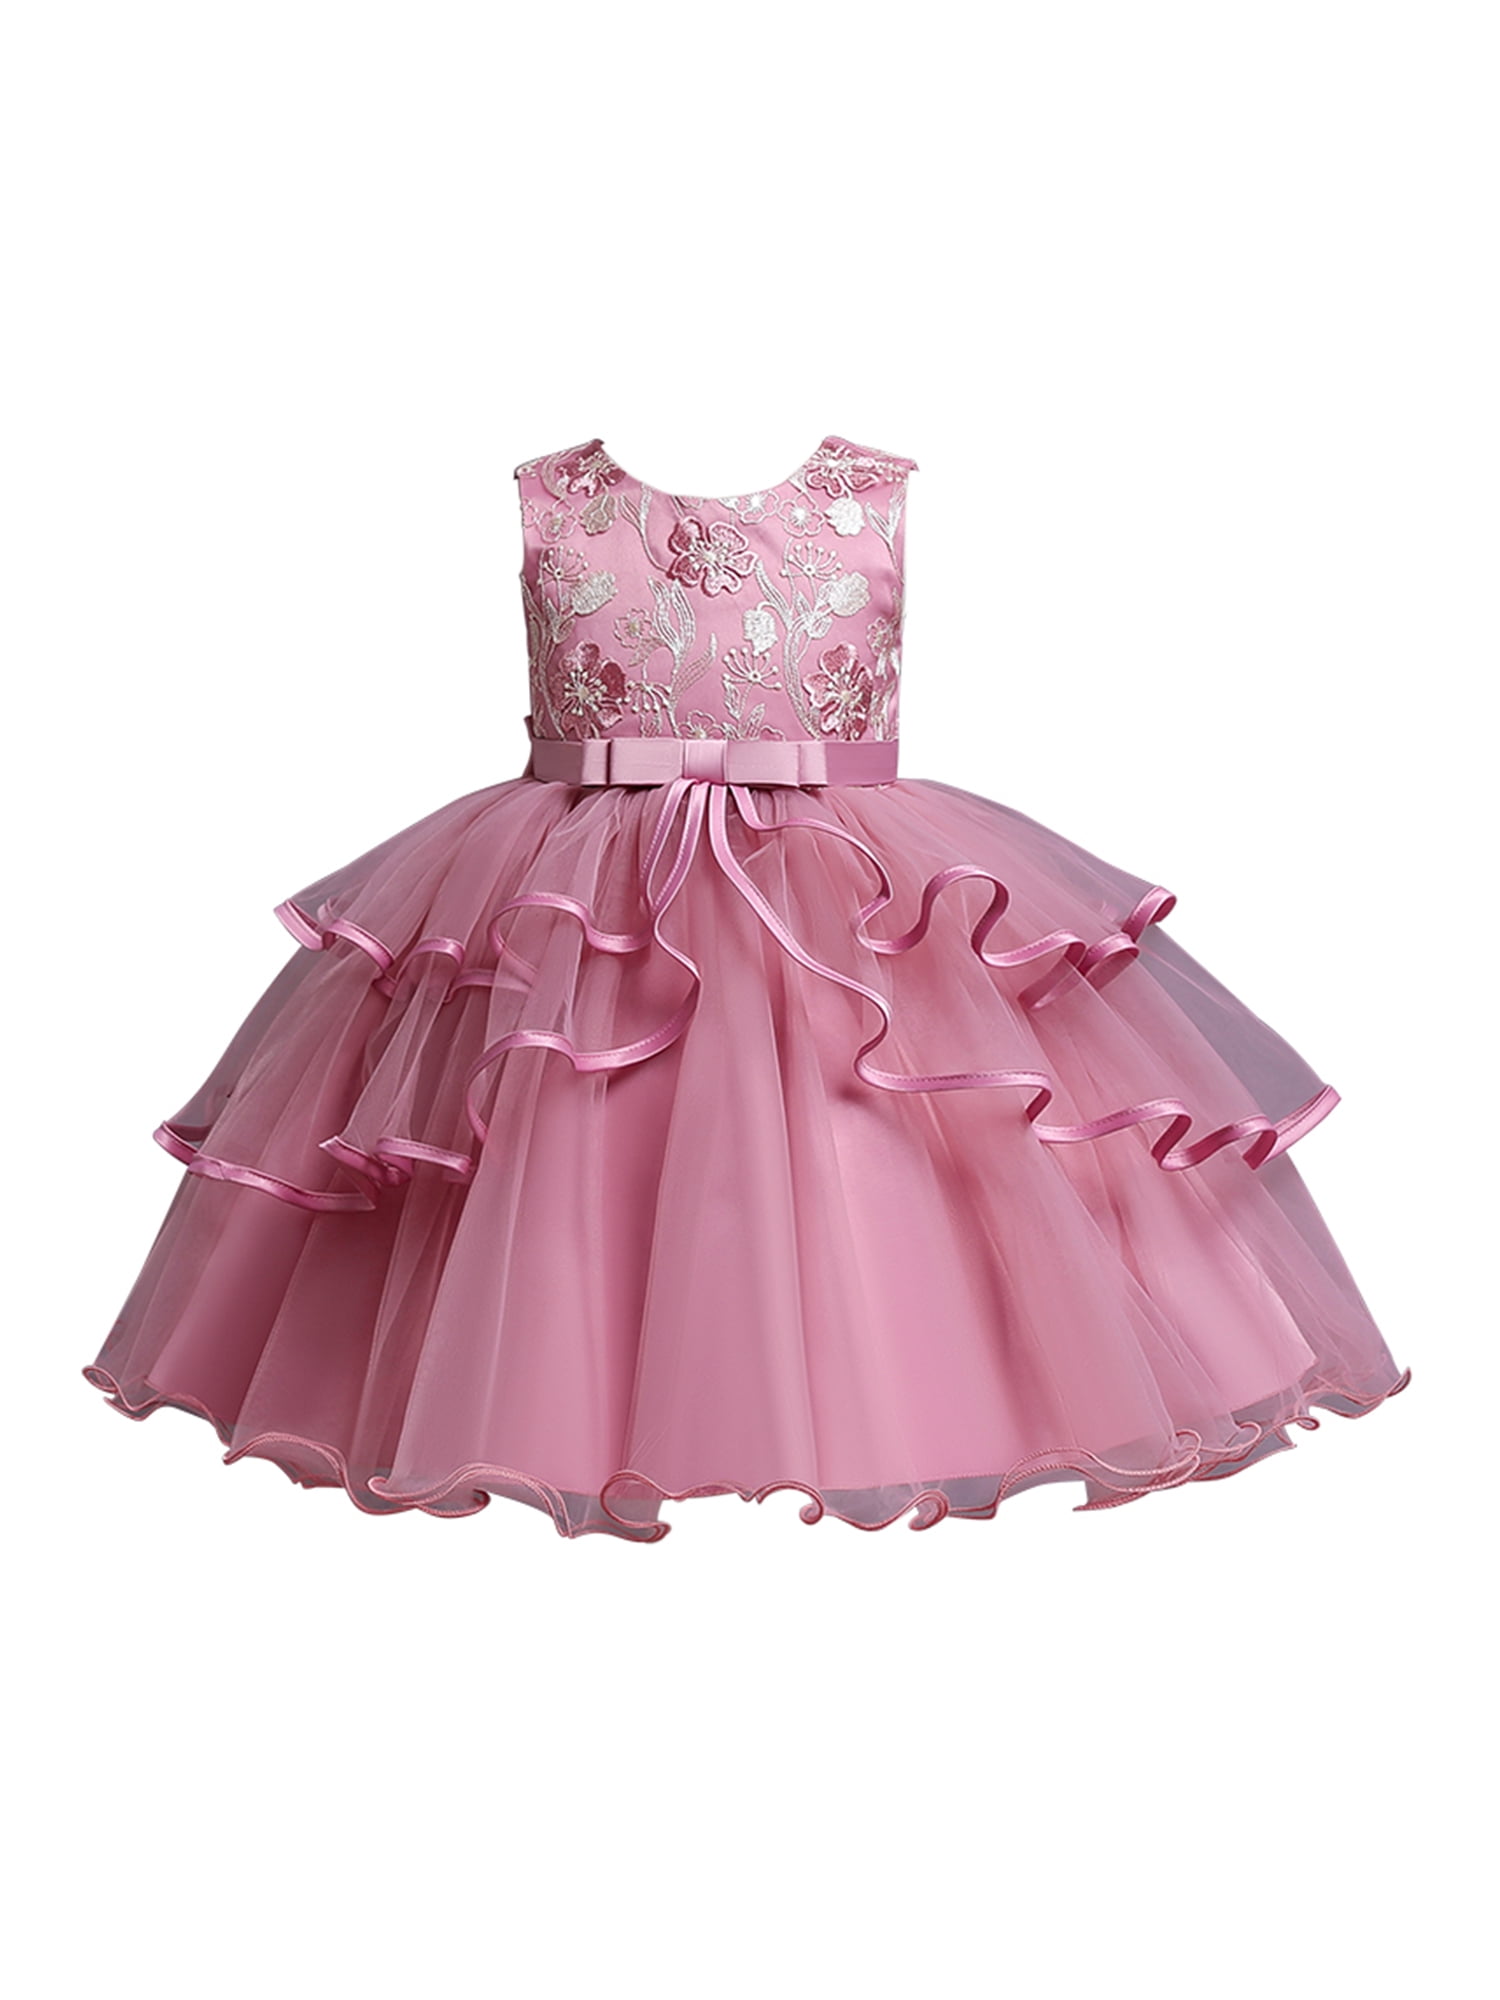 Flower Girl Princess Dress Kid Baby Lace Party Wedding Pageant Tulle Tutu Dress 